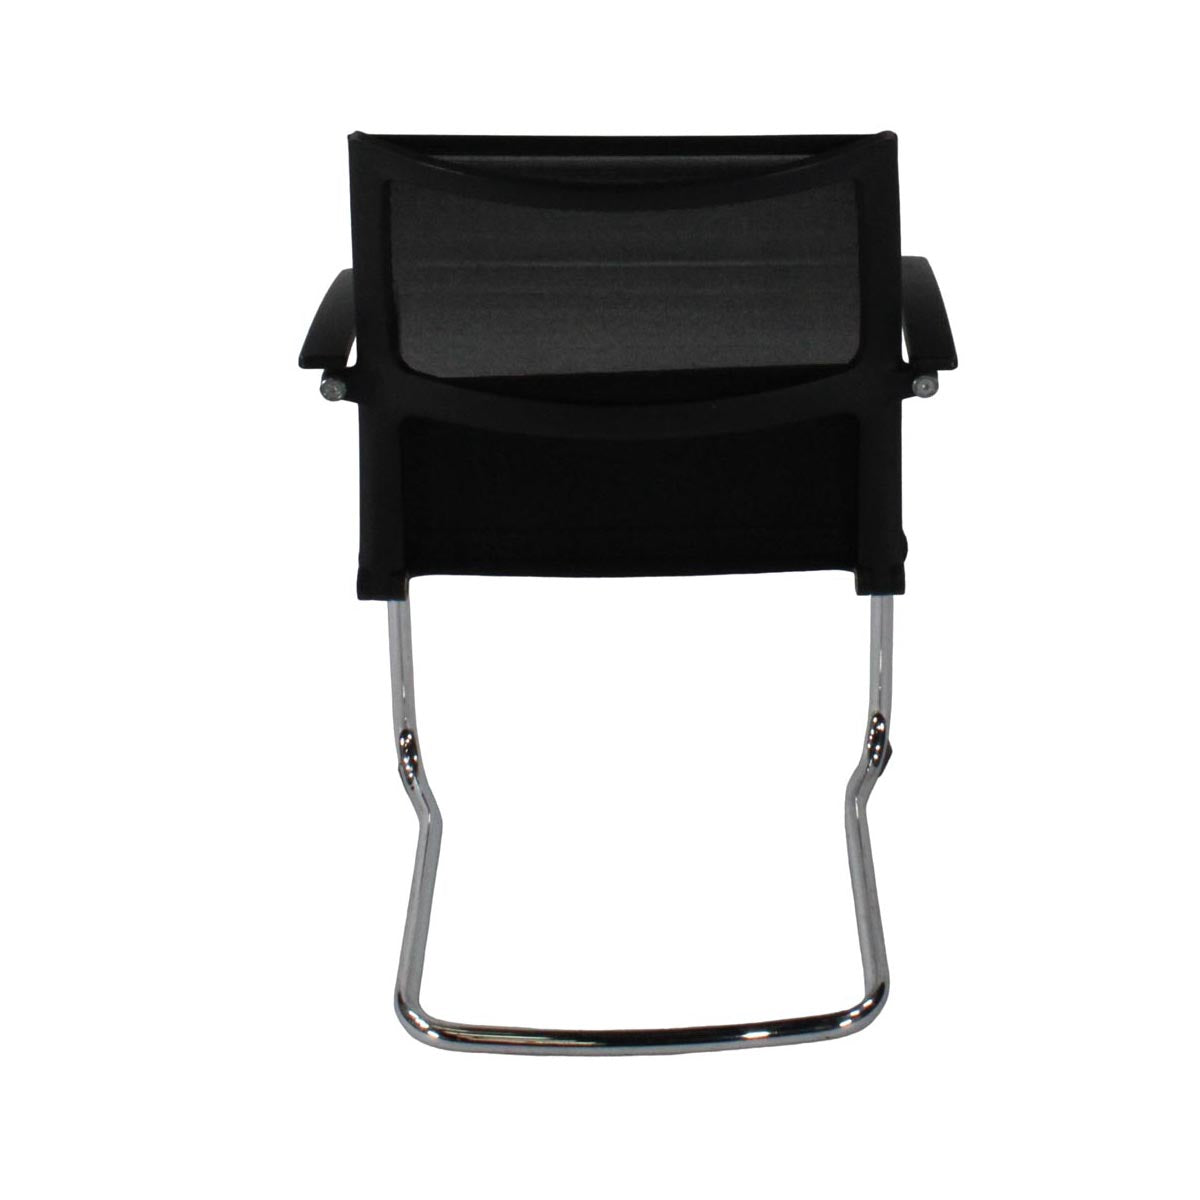 Sedus: Open Up Cantilever Chair with Mesh Back/Aluminium Frame in Black Fabric - Refurbished